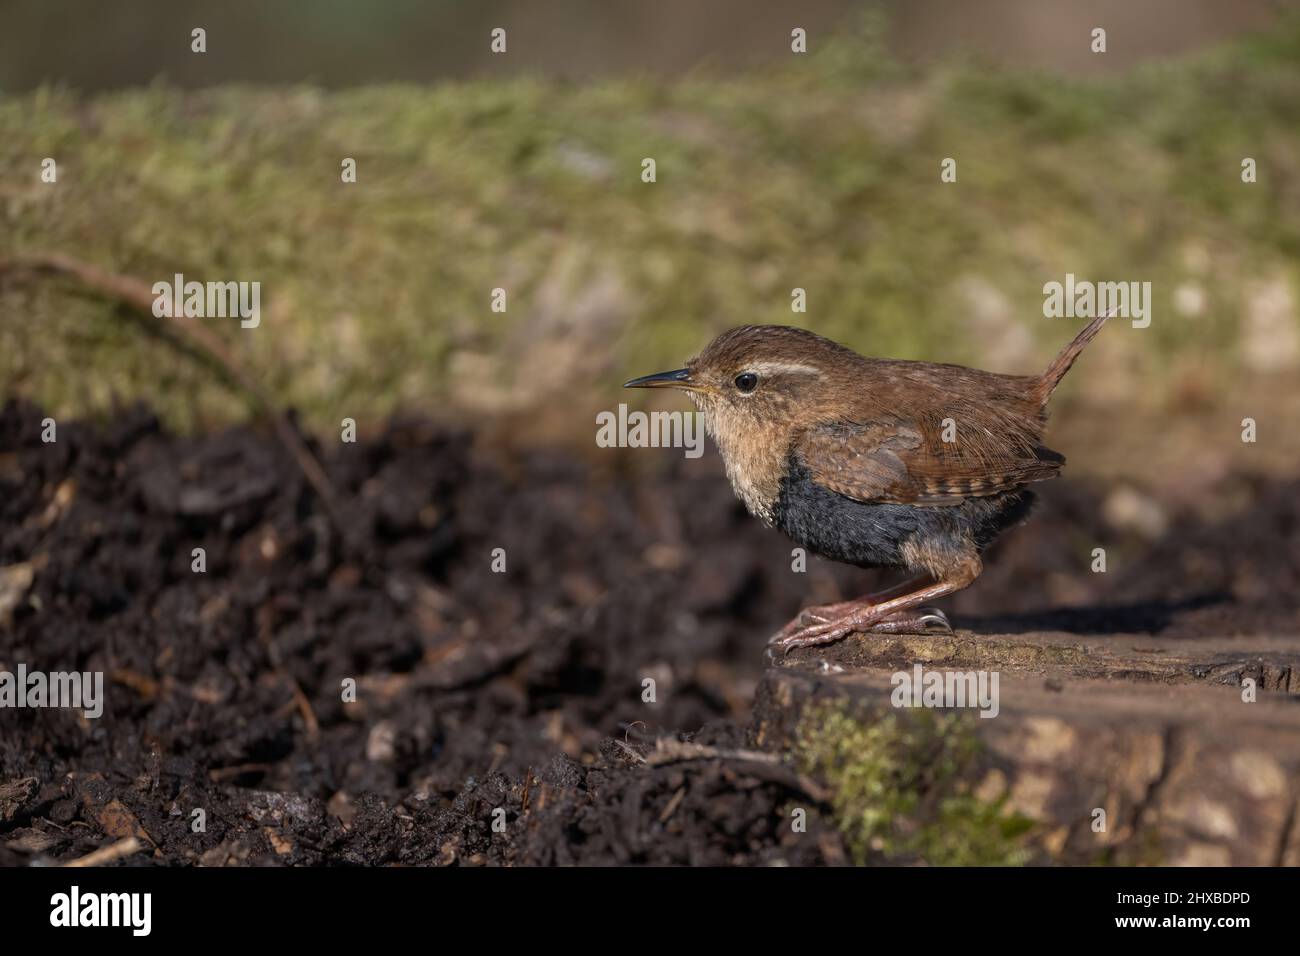 A tiny Eurasian wren (Troglodytes troglodytes) on a log in a wood in Sussex, England Stock Photo